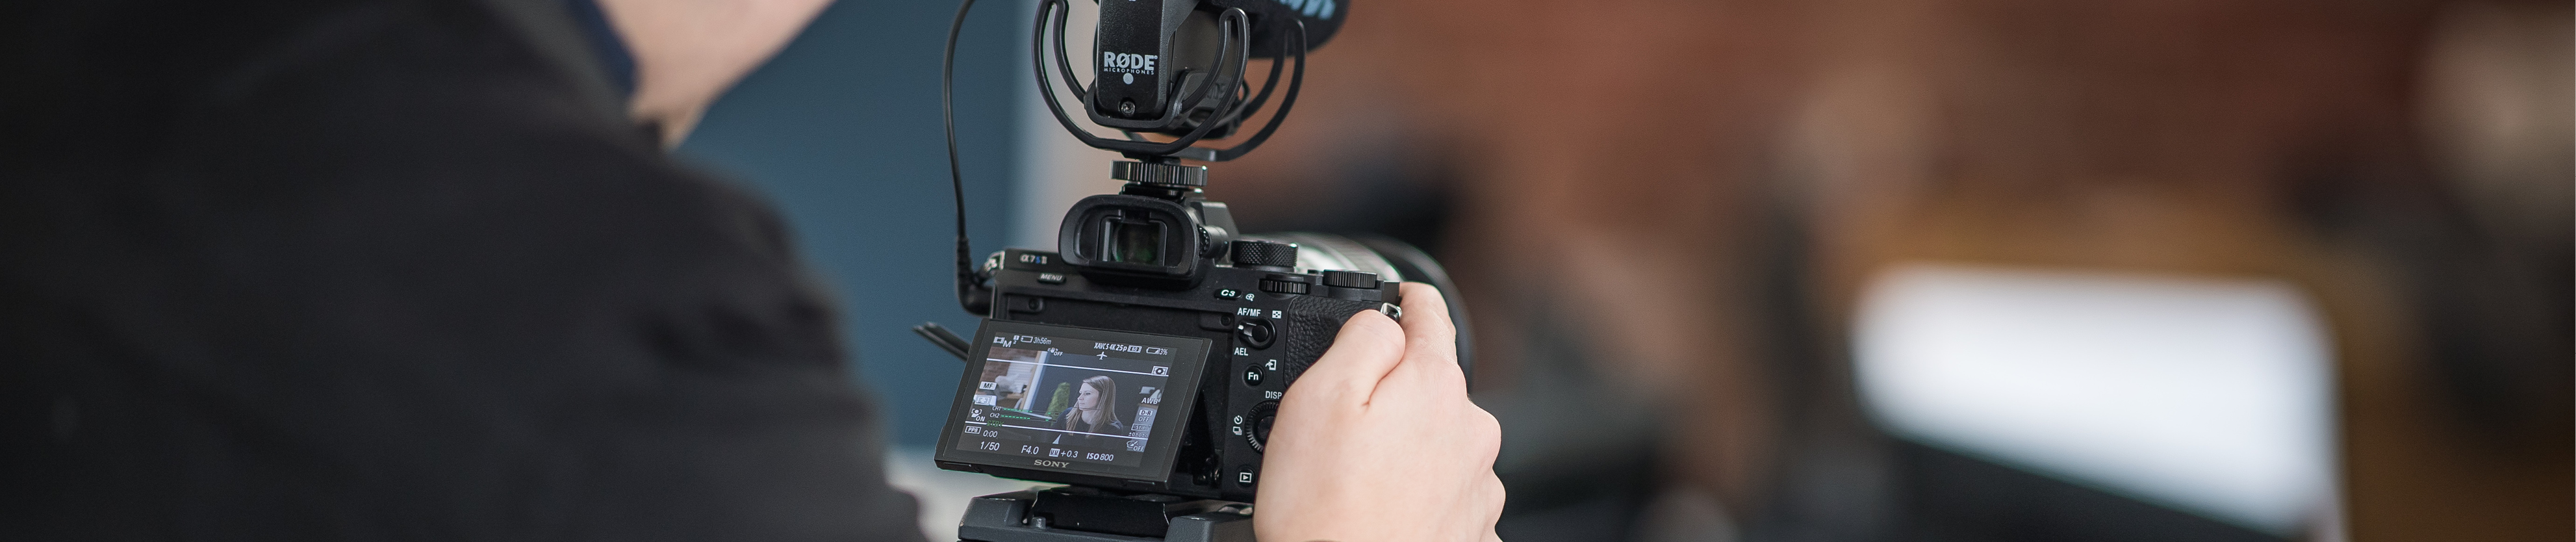 The best types of video content to promote your business